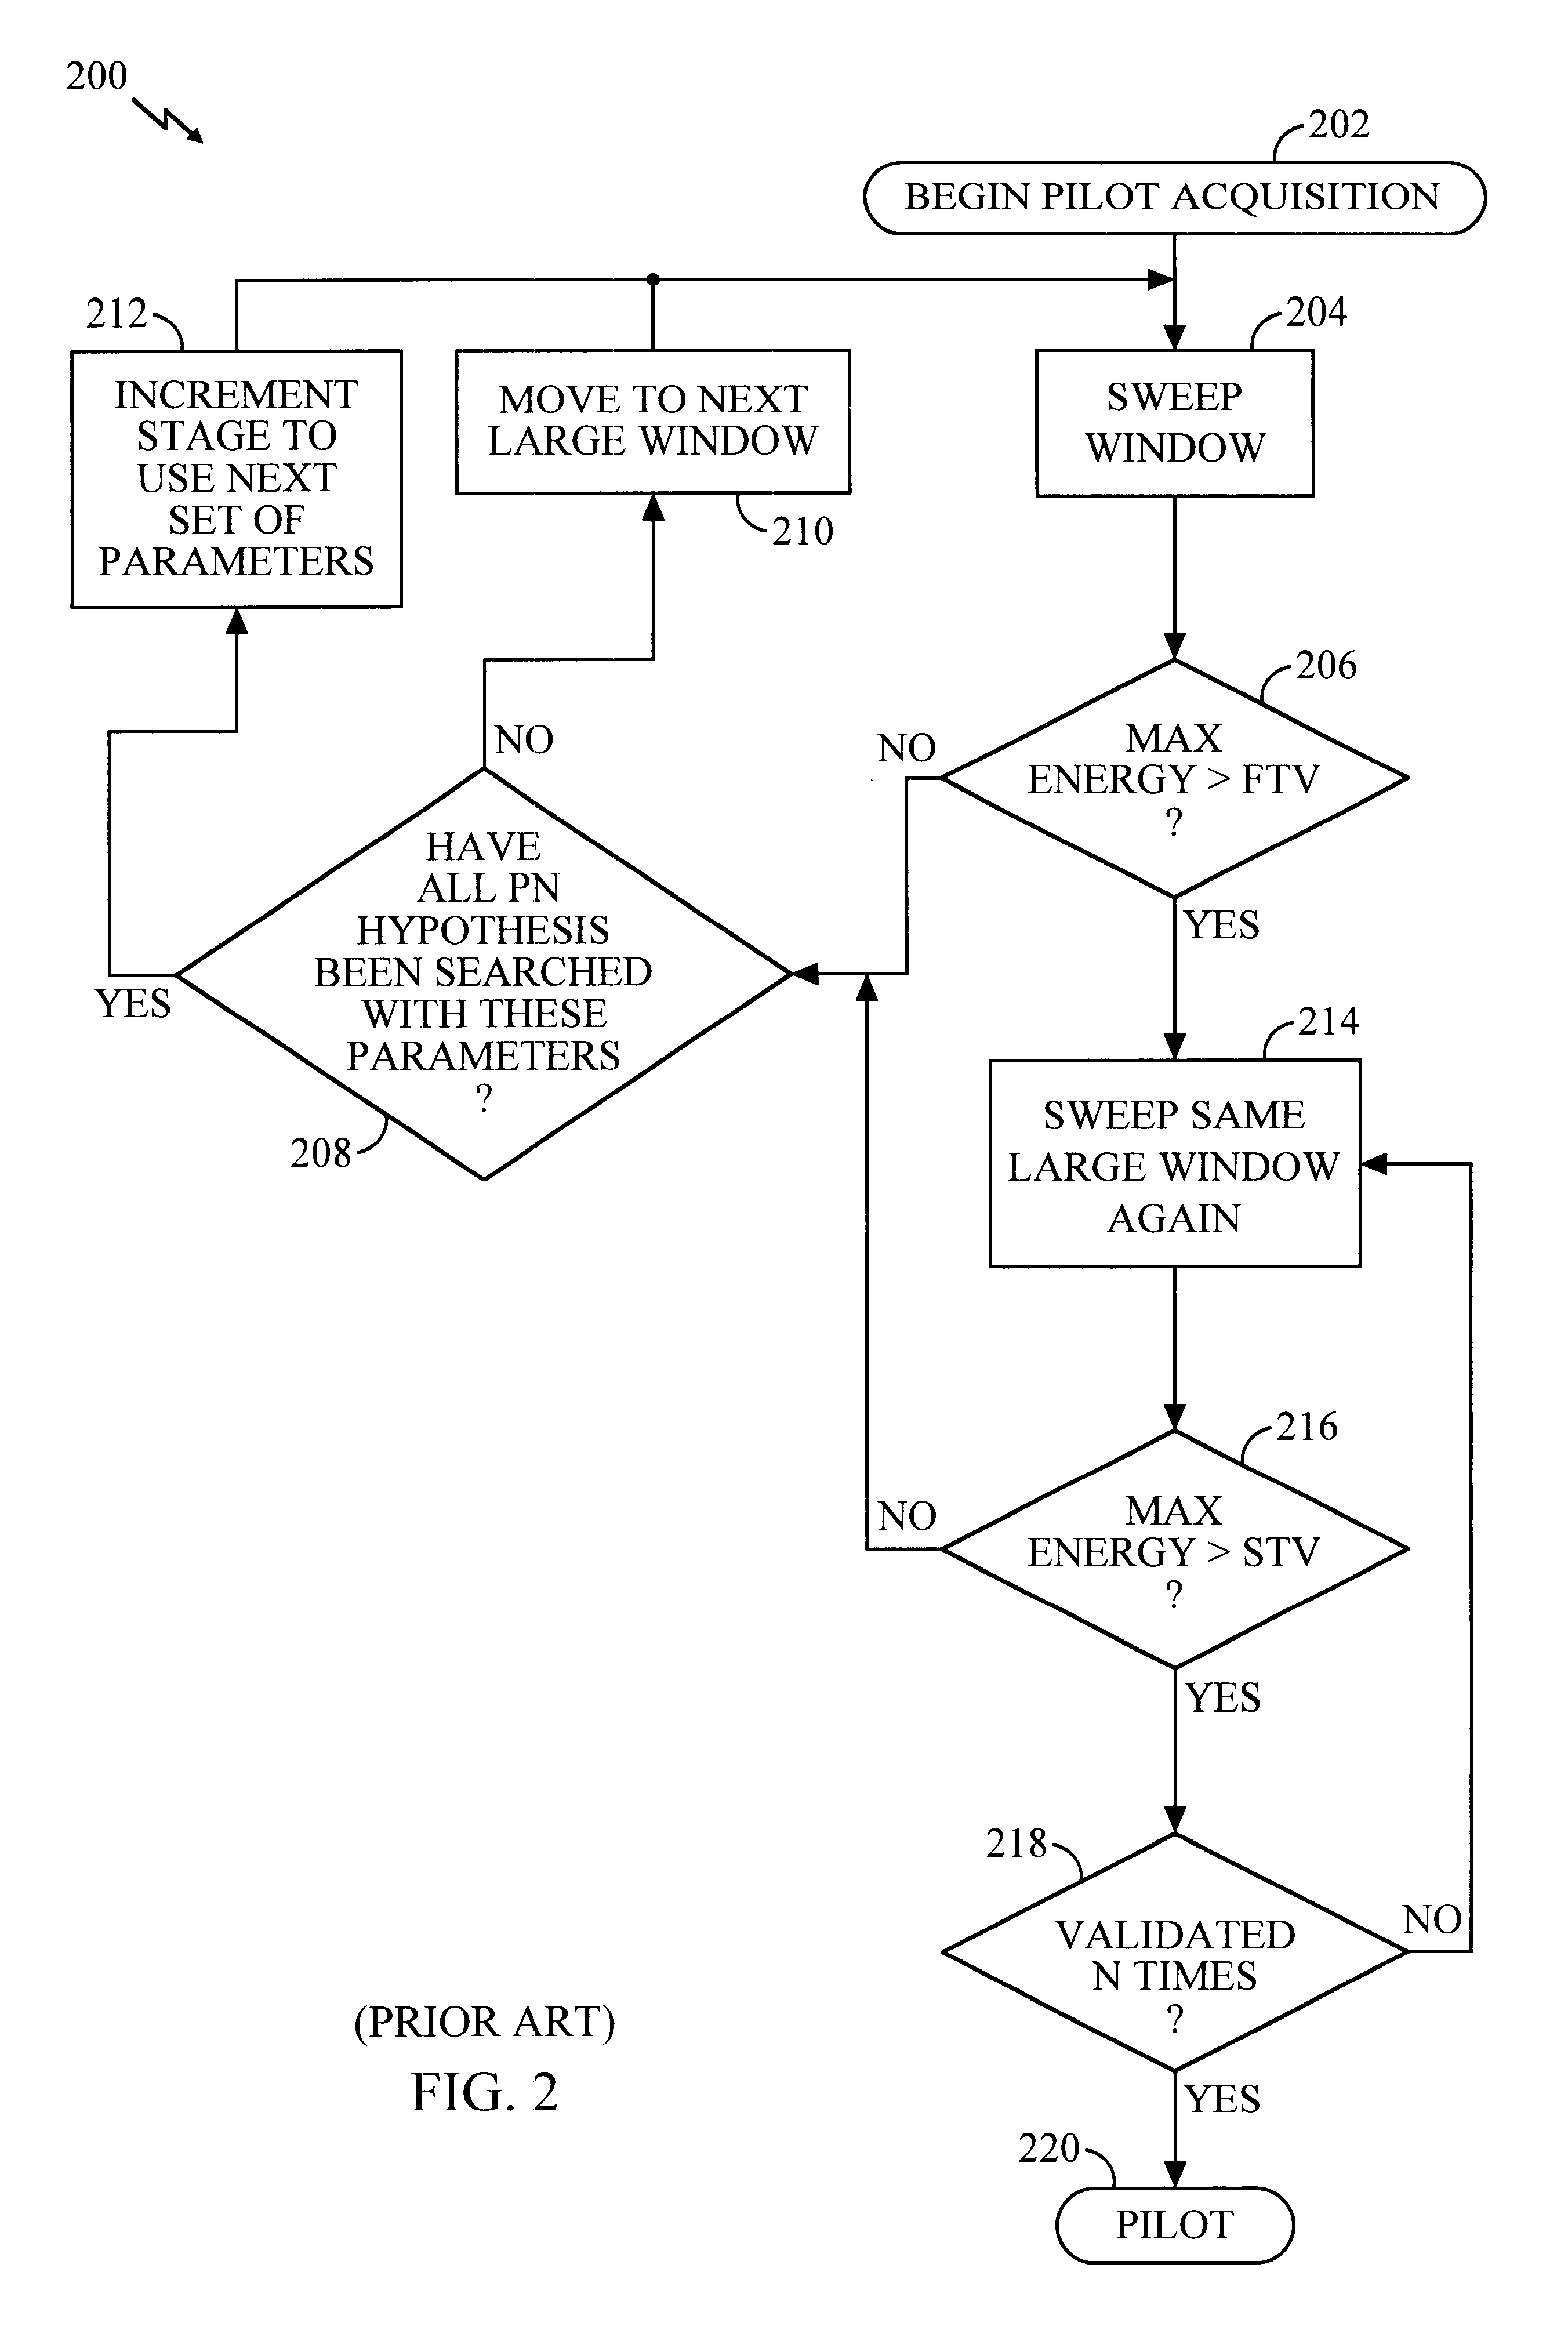 Method and apparatus for performing search acquisition in a multi-carrier communication system